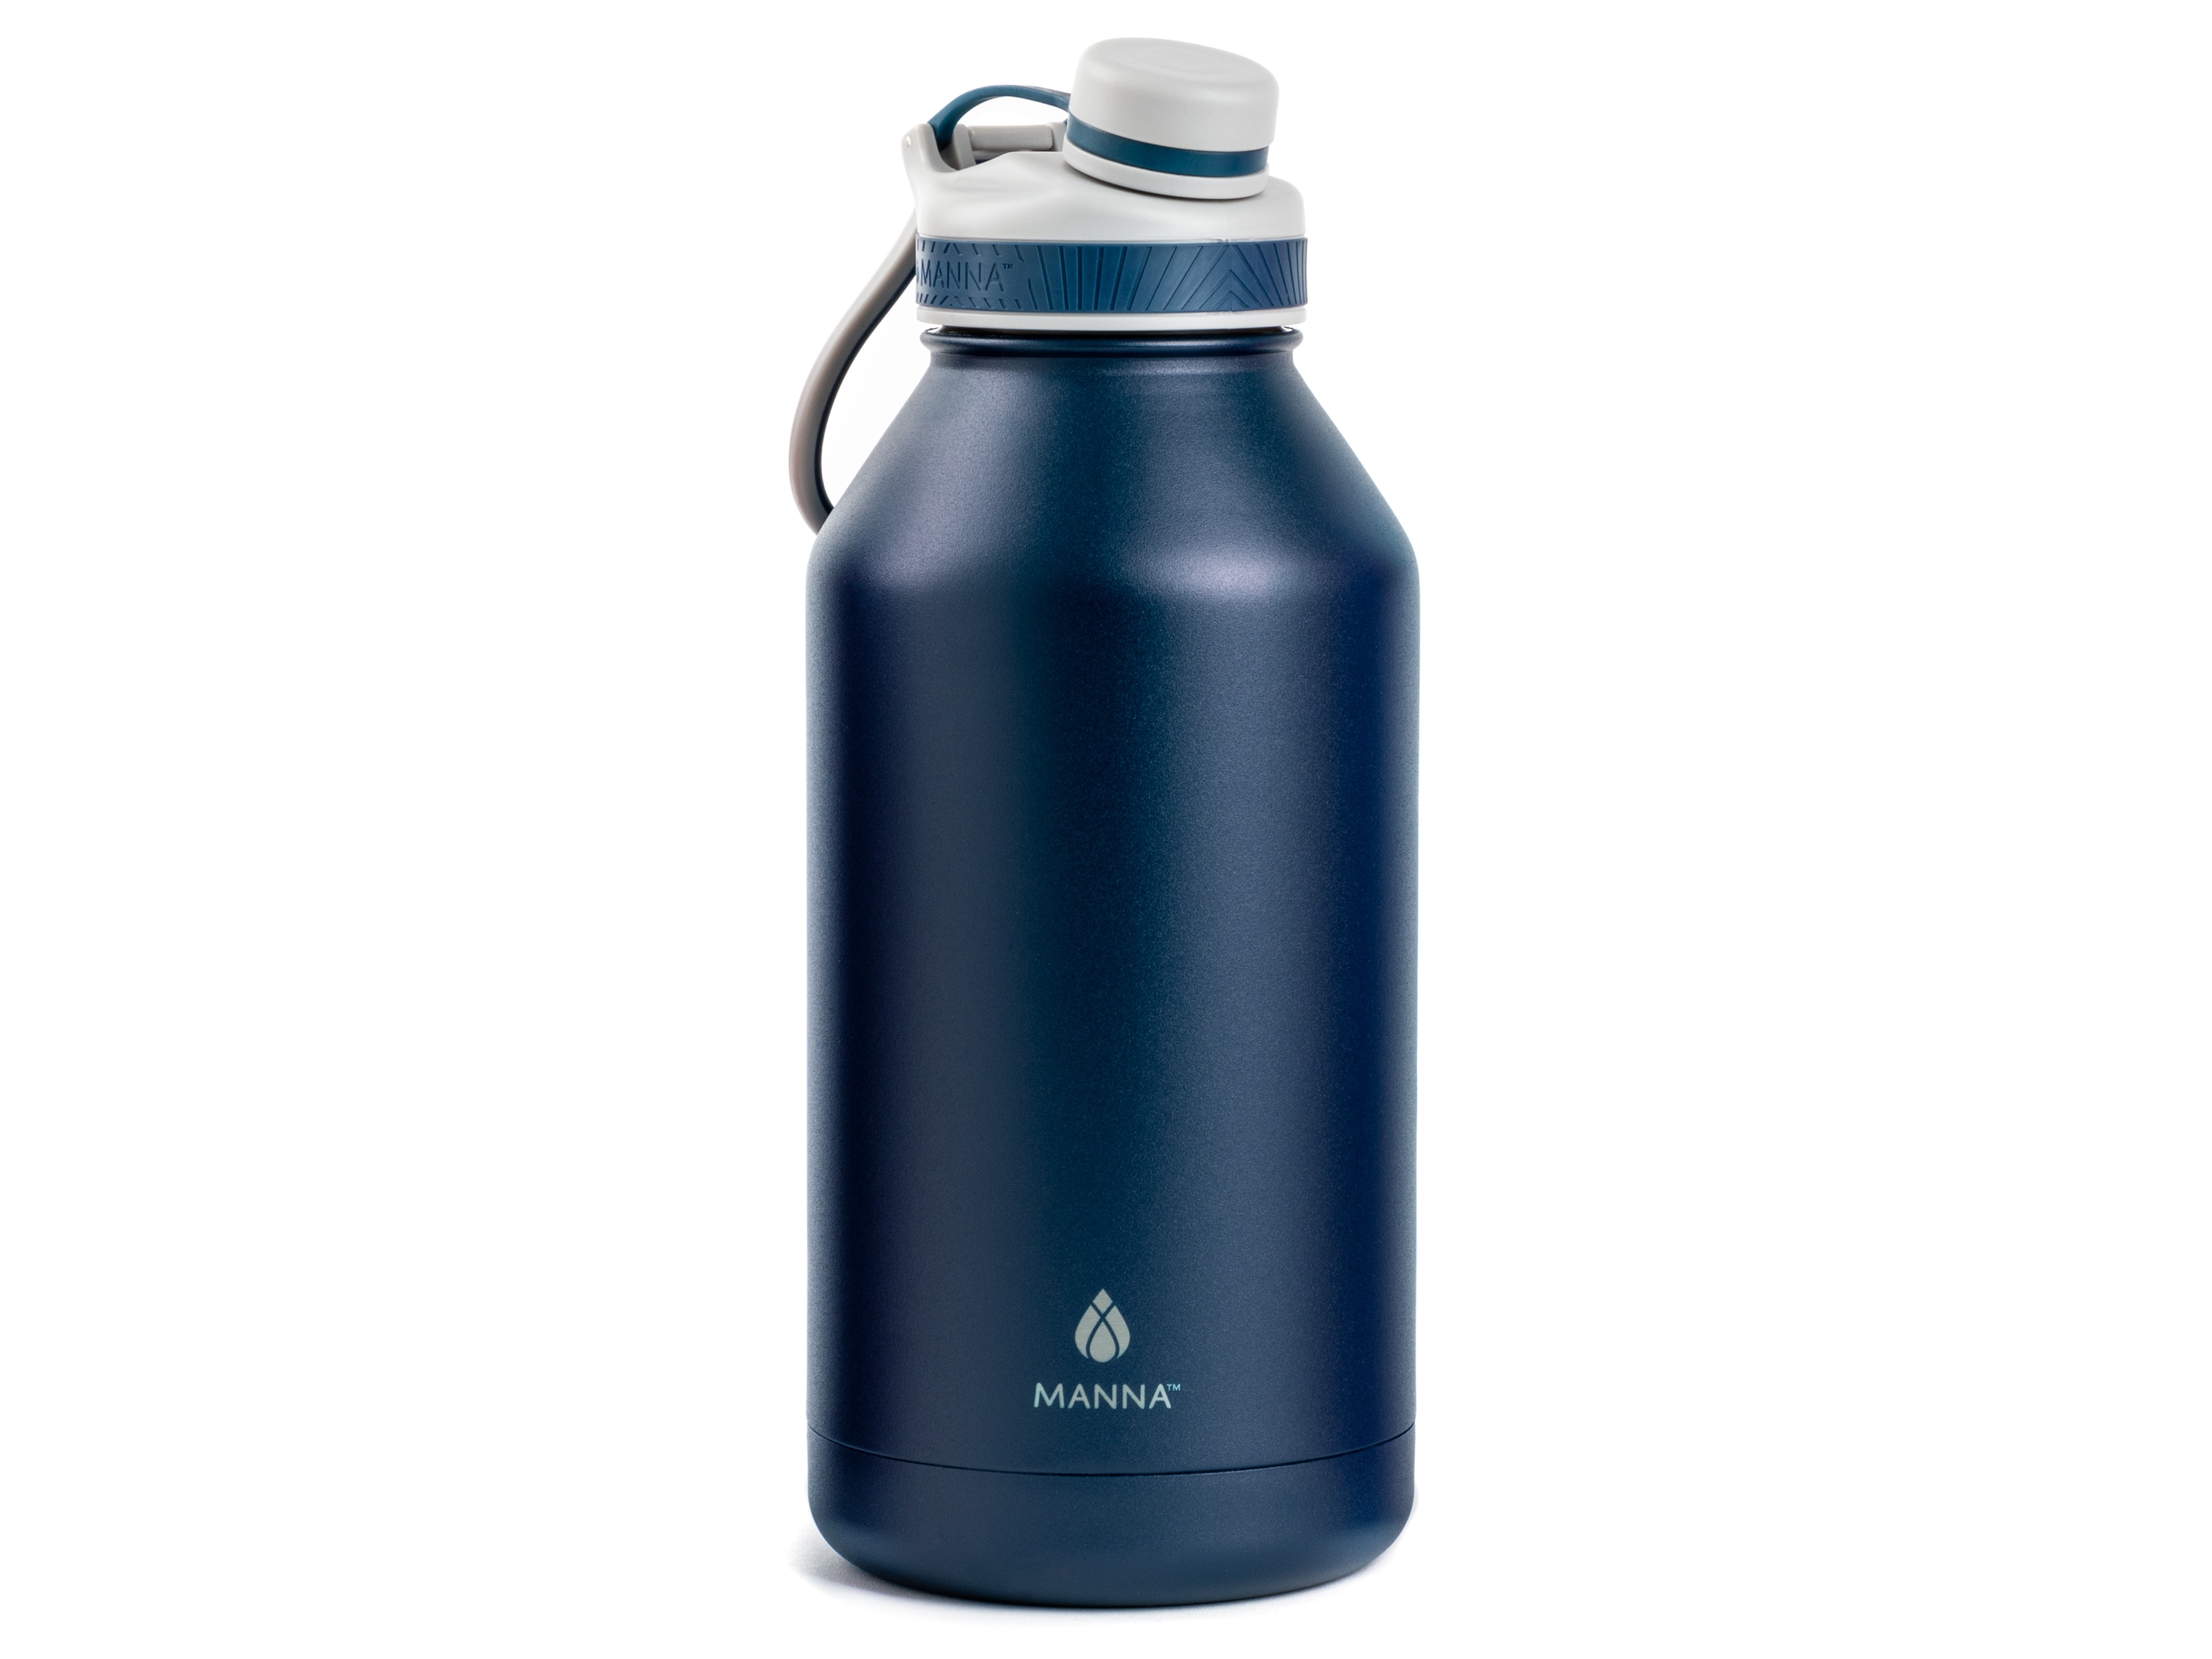 Manna 64-fl oz Stainless Steel Insulated Water Bottle at